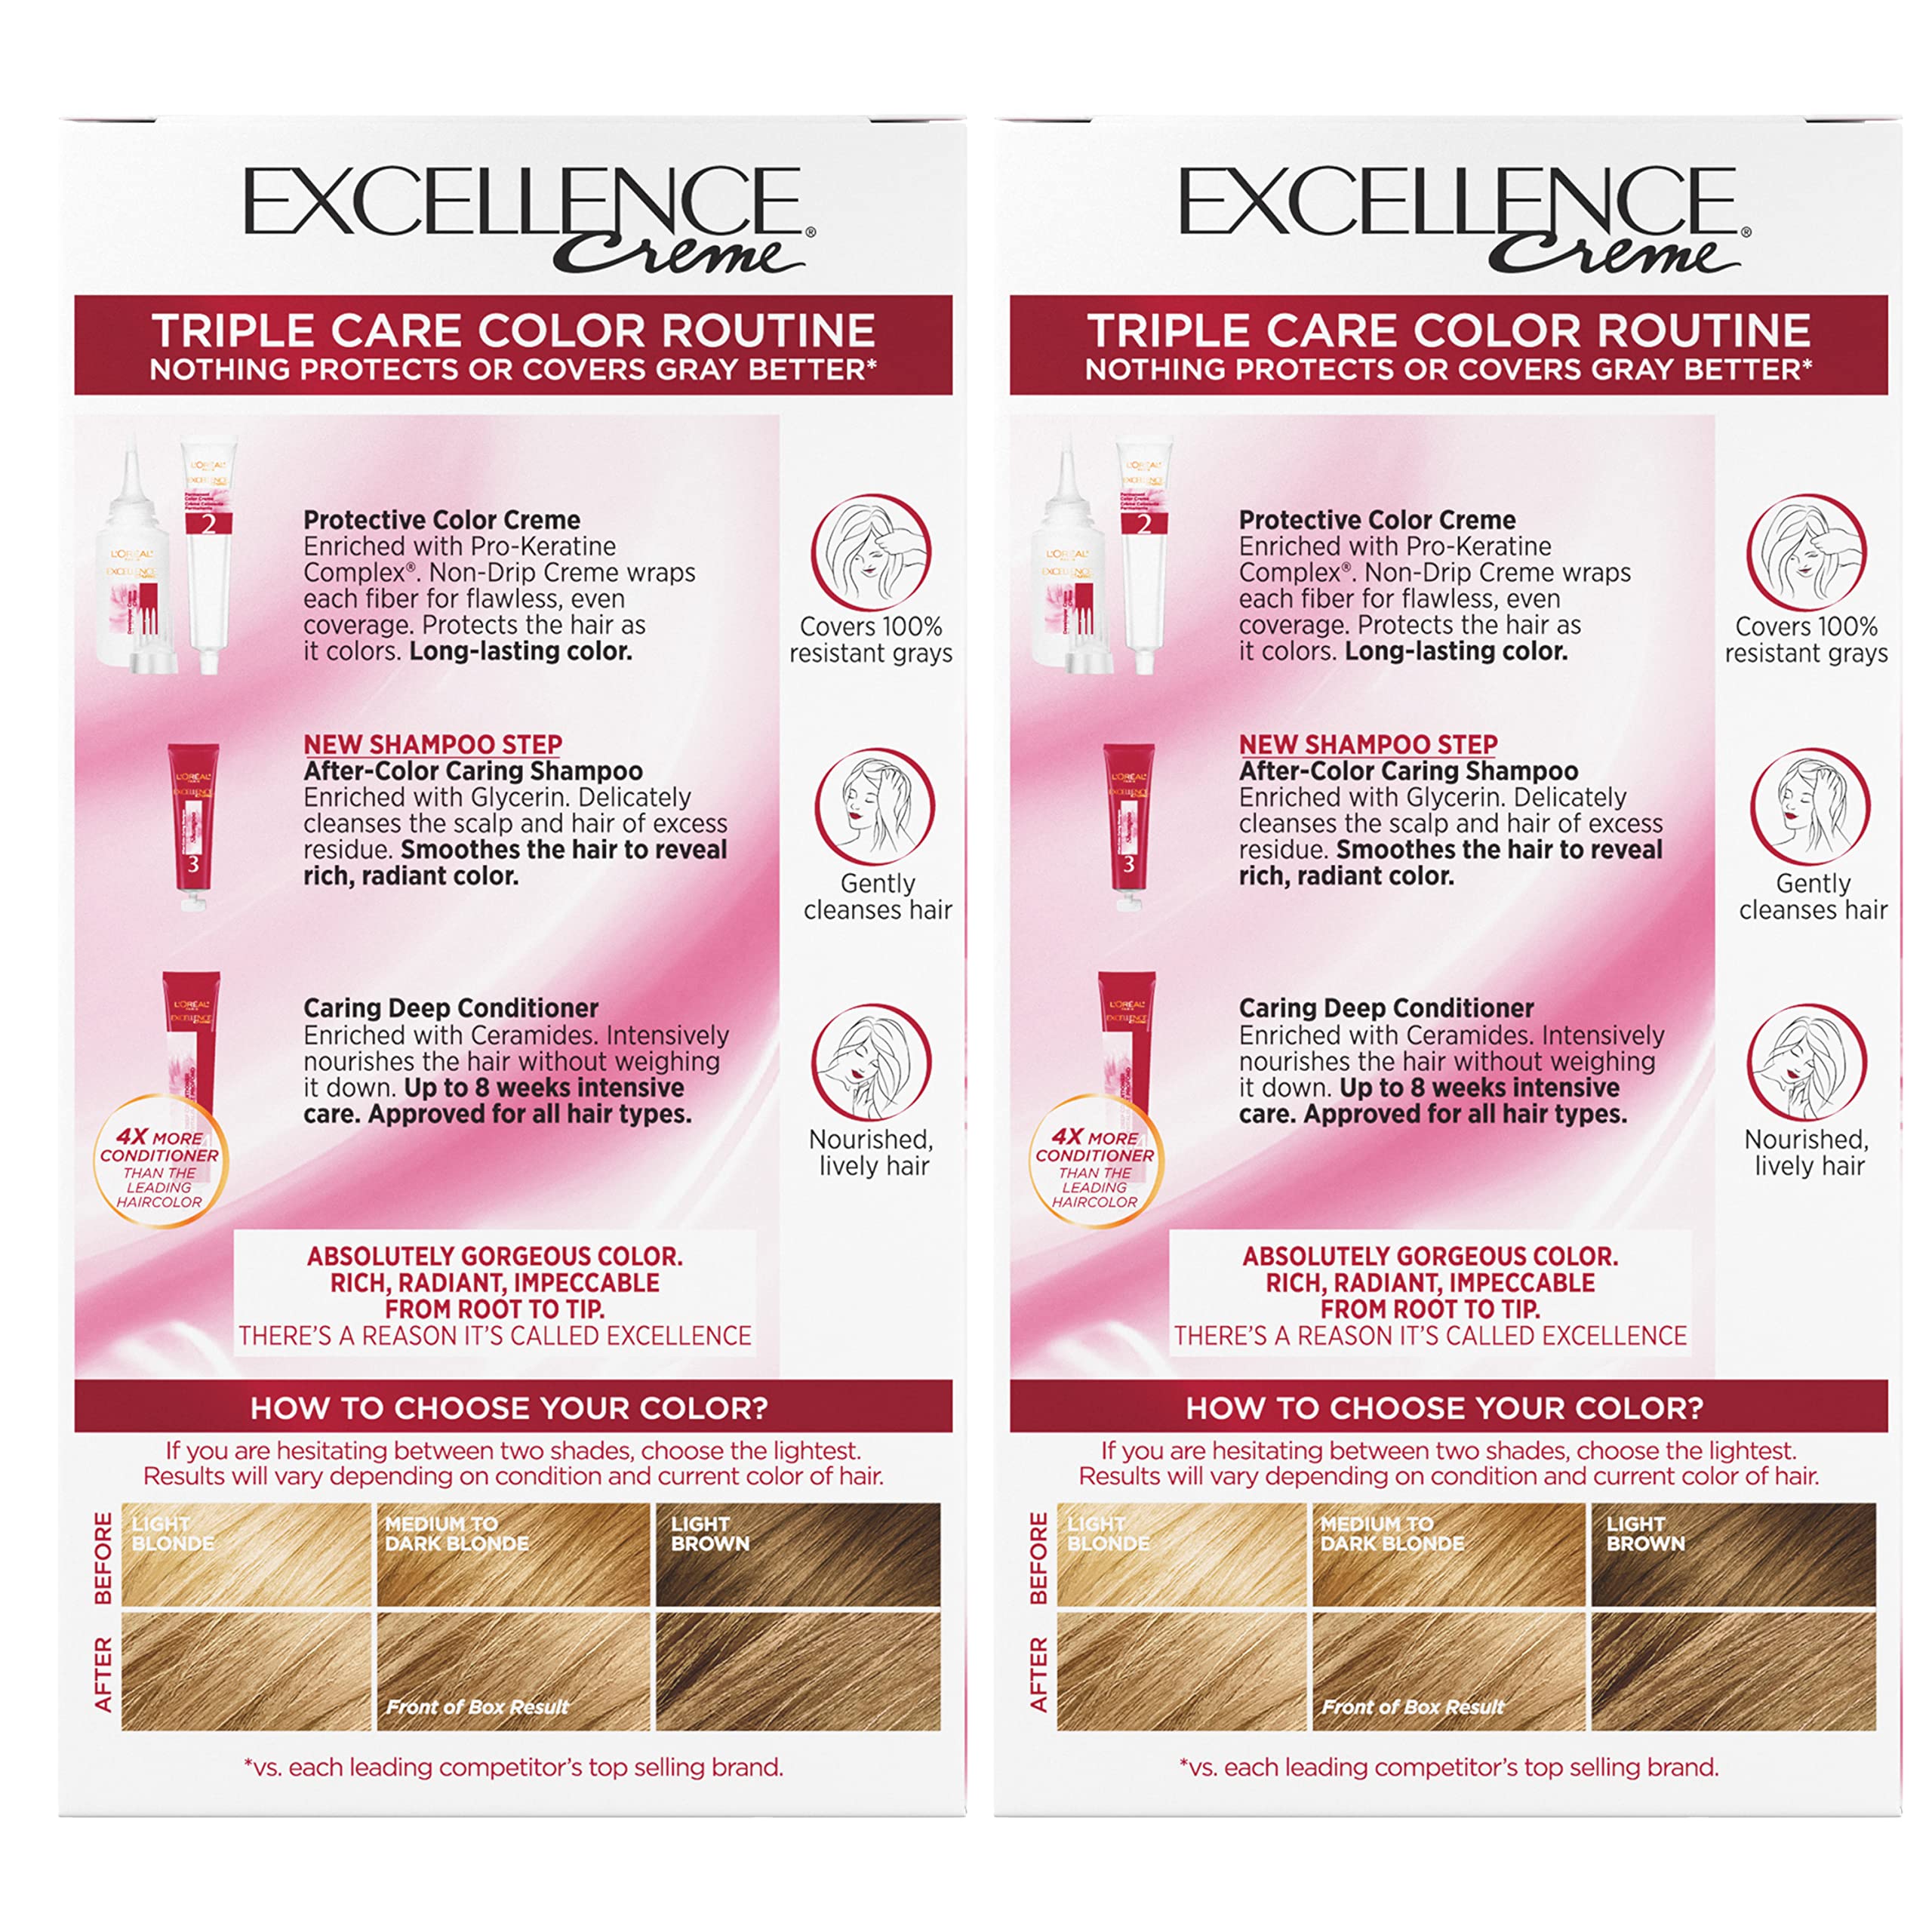 L'Oreal Paris Excellence Creme Permanent Hair Color, 8 Medium Blonde, 100 percent Gray Coverage Hair Dye, Pack of 2